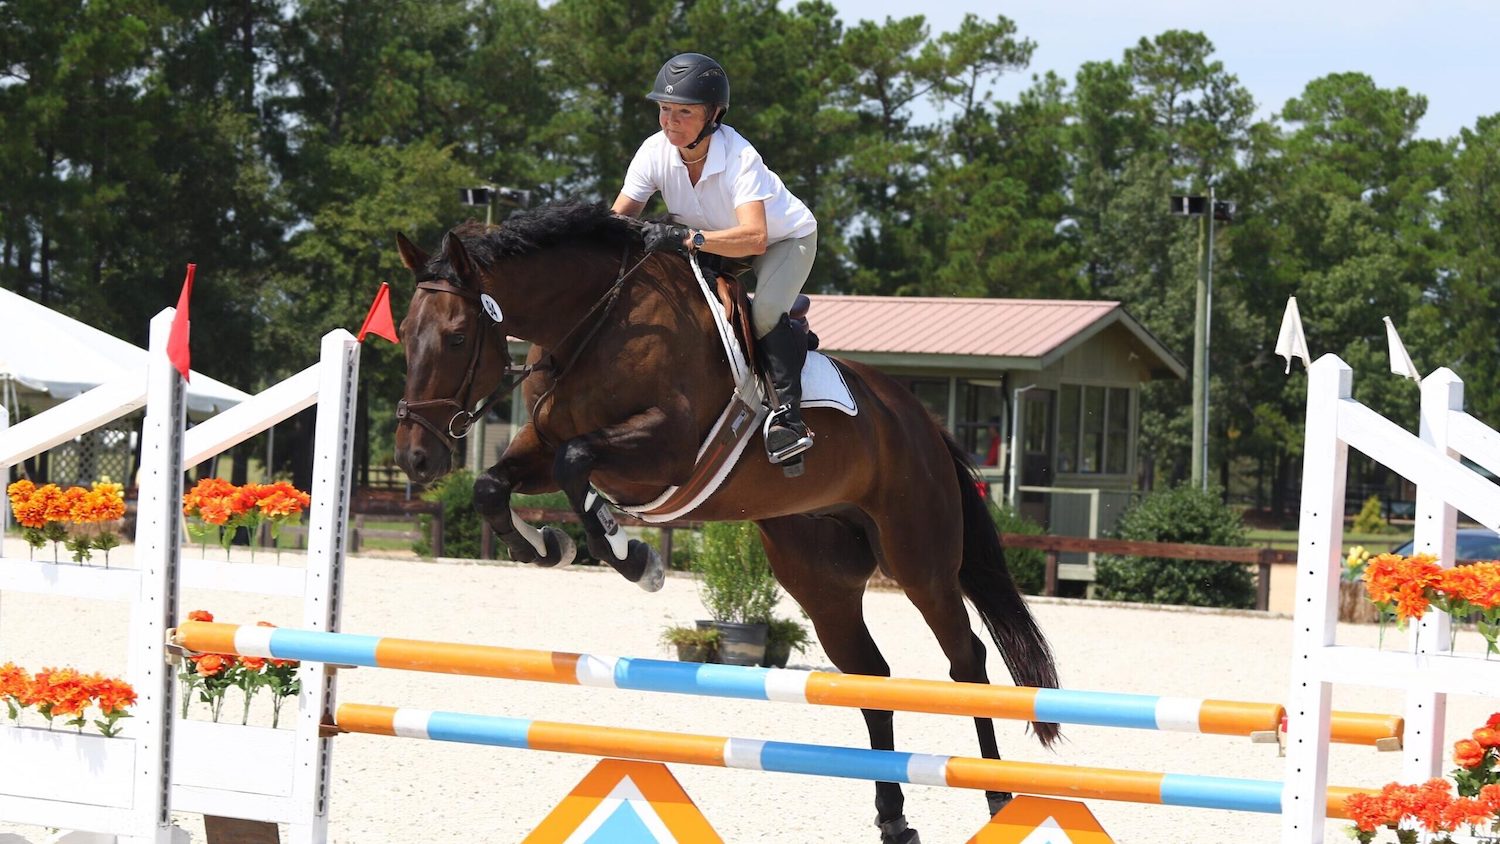 Horse and rider jumping a barrier